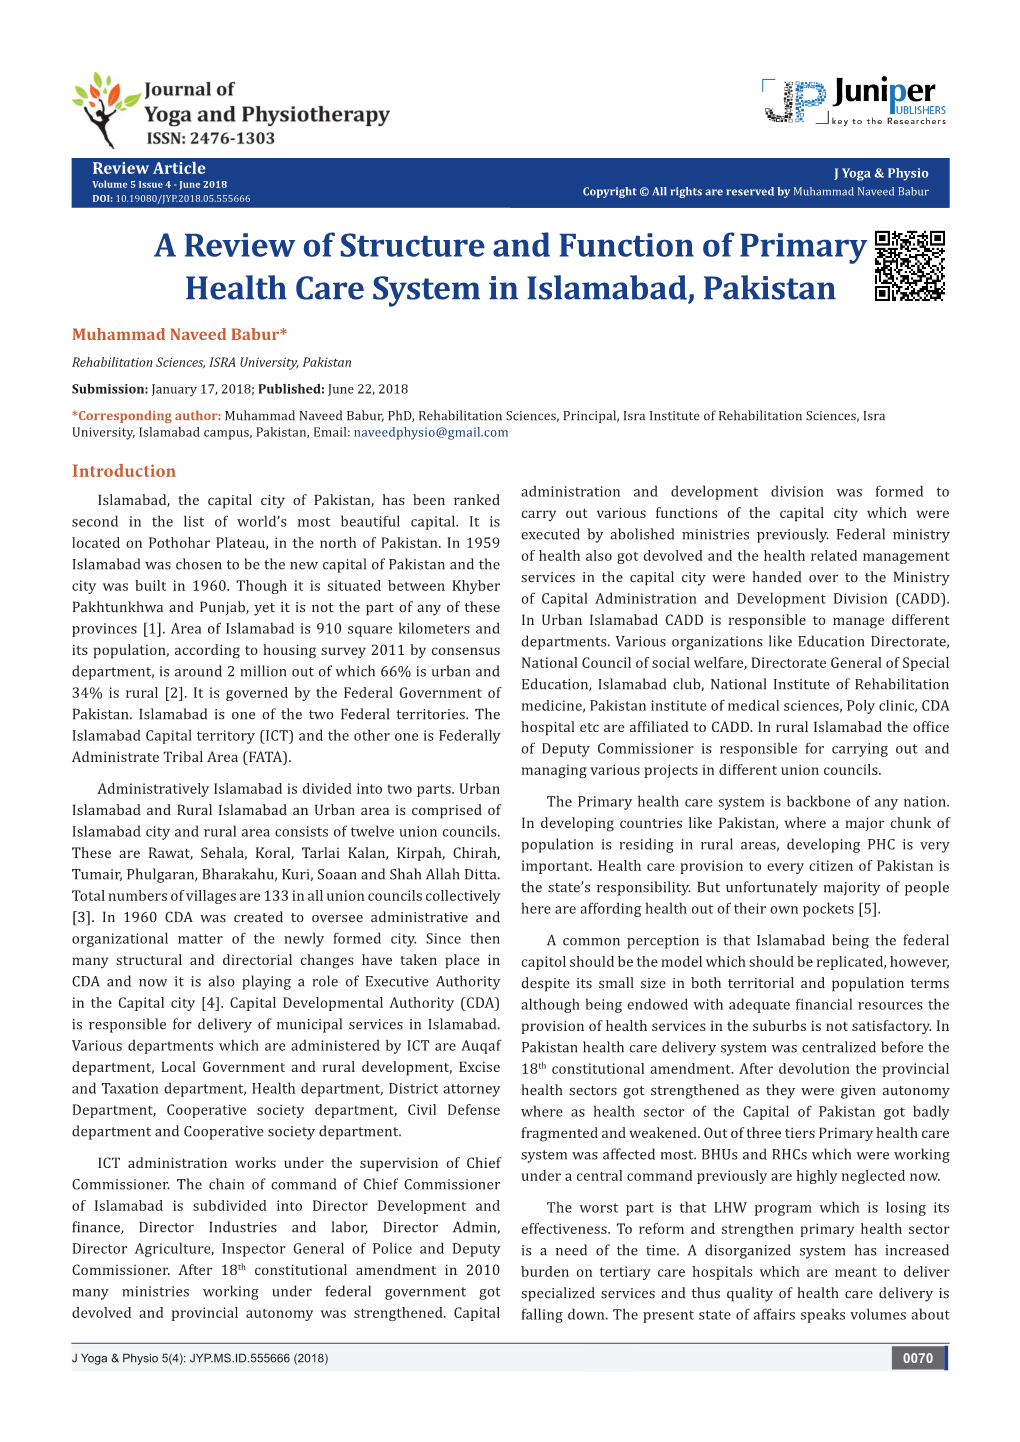 A Review of Structure and Function of Primary Health Care System in Islamabad, Pakistan